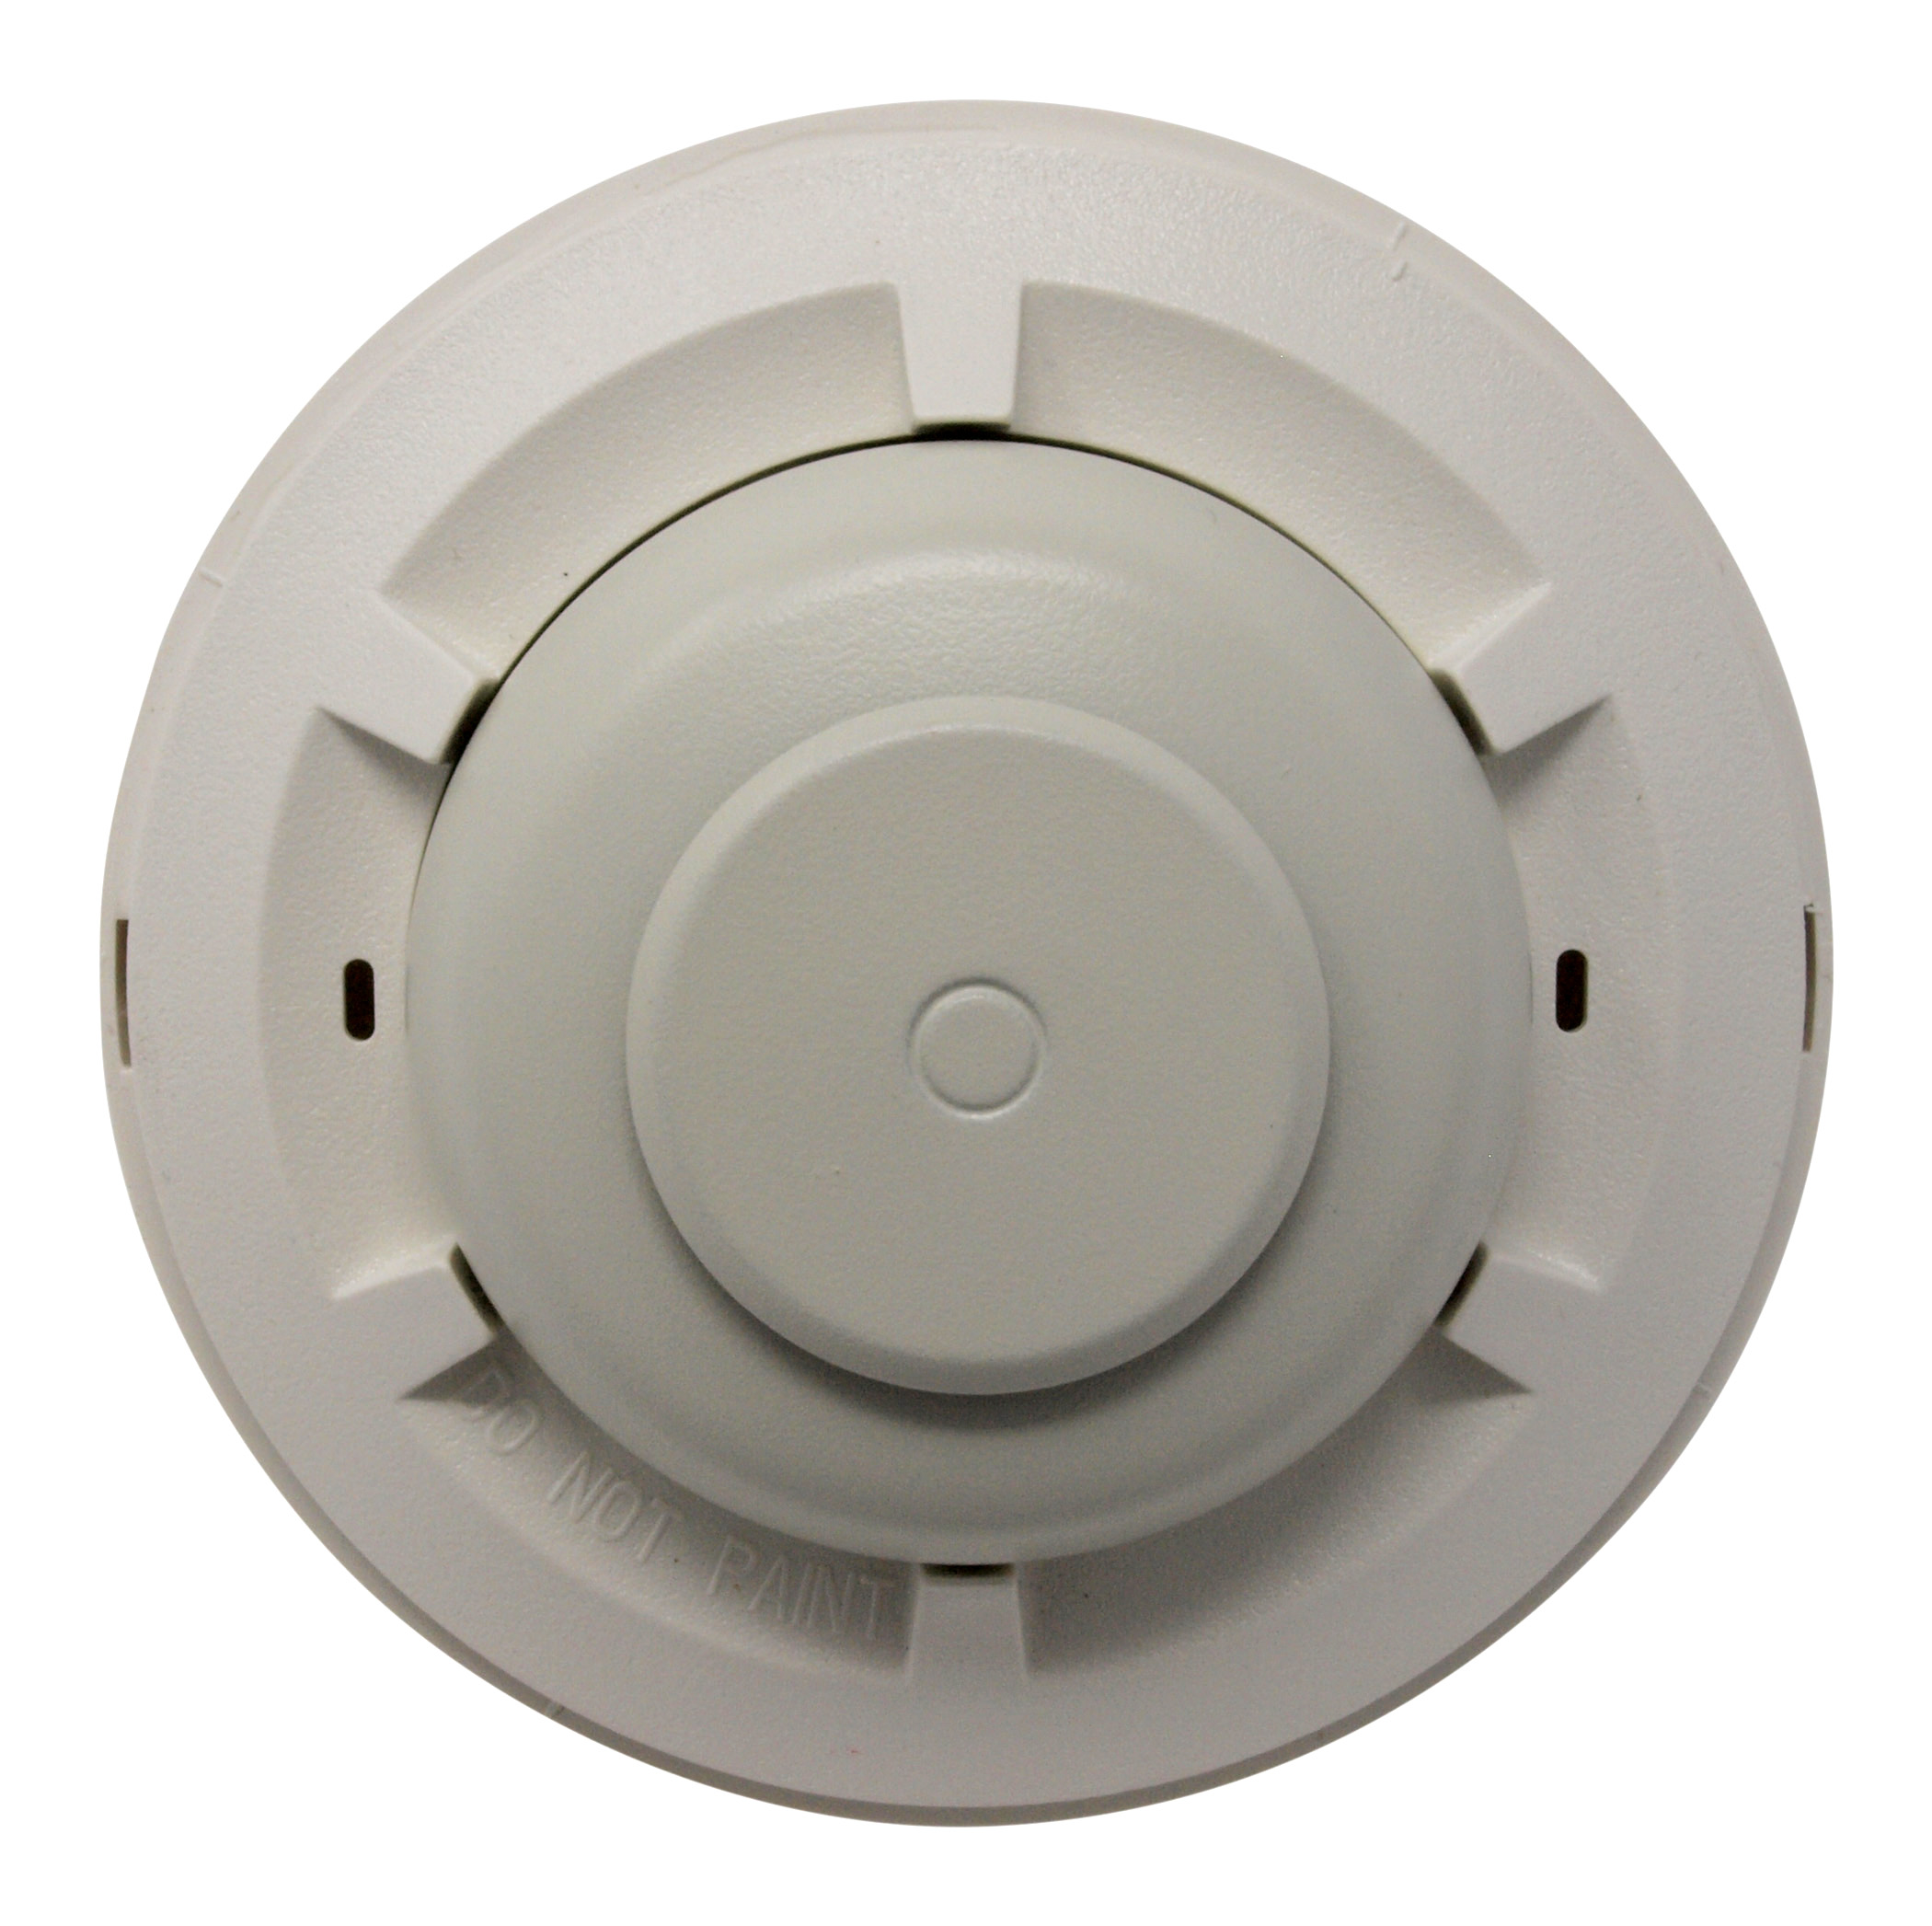 20512 Fire Detector, 135F, Fixed & Rate of Rise